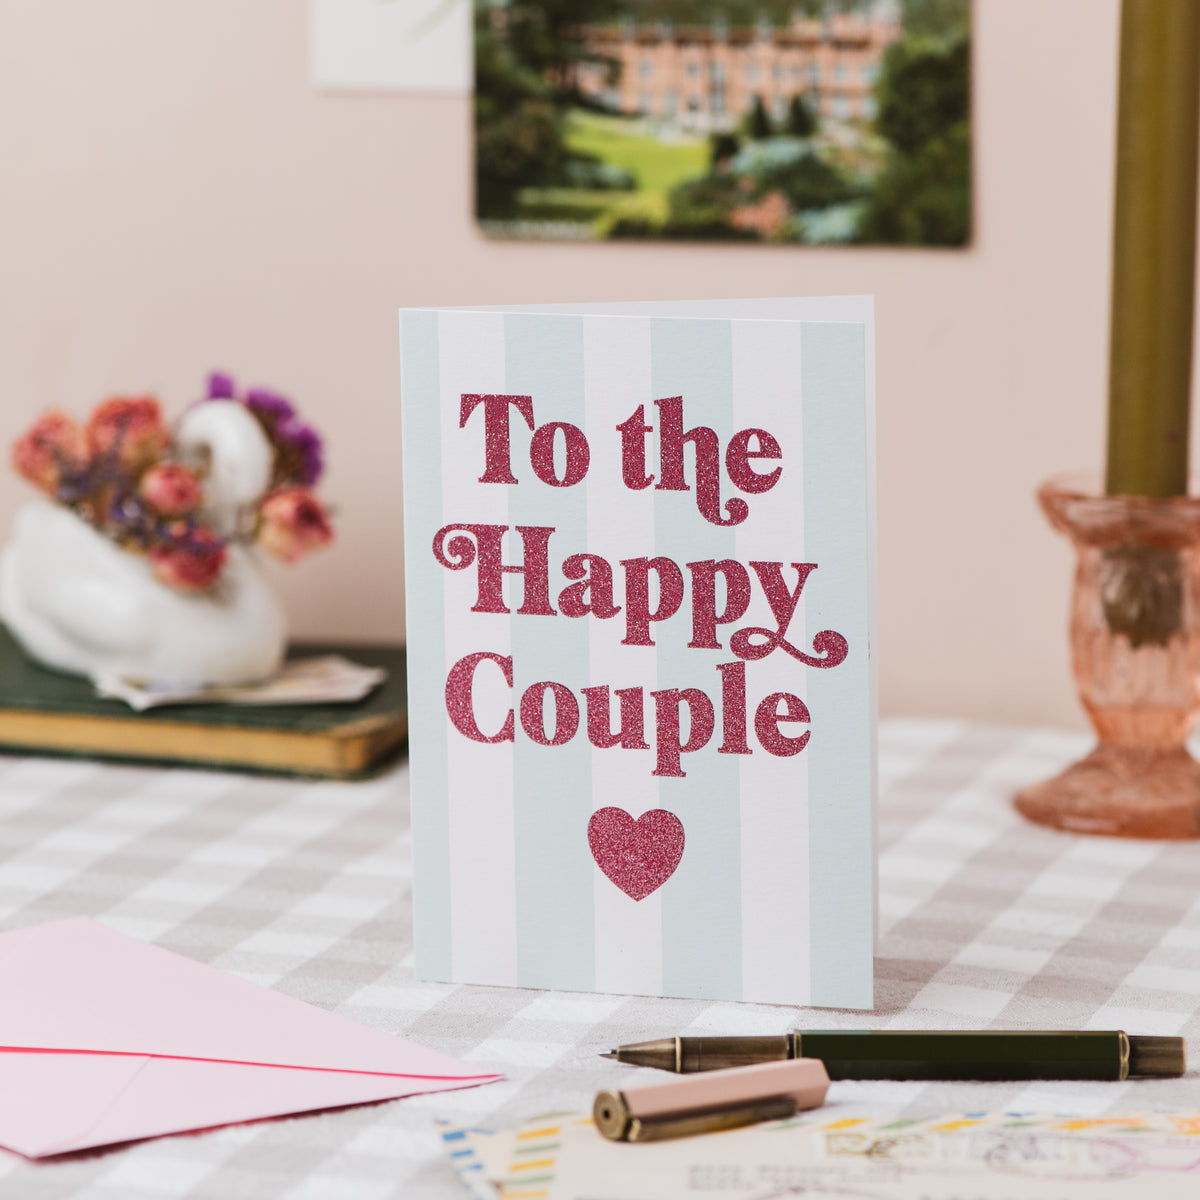 'To the Happy Couple' Greetings Card - Biodegradable Glitter